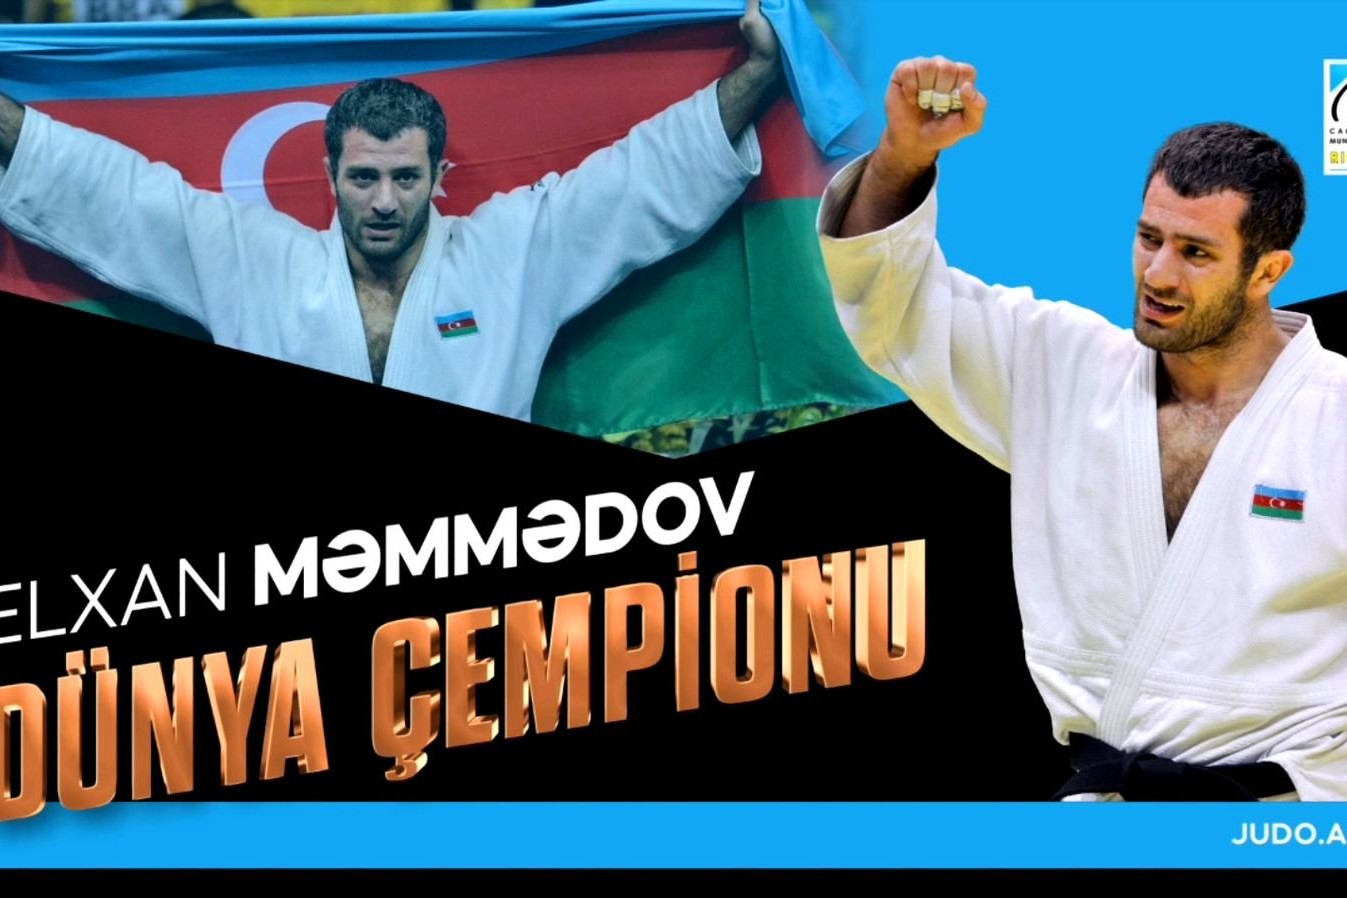 Elkhan Mammadov’s victory in the World Championship was a decade ago